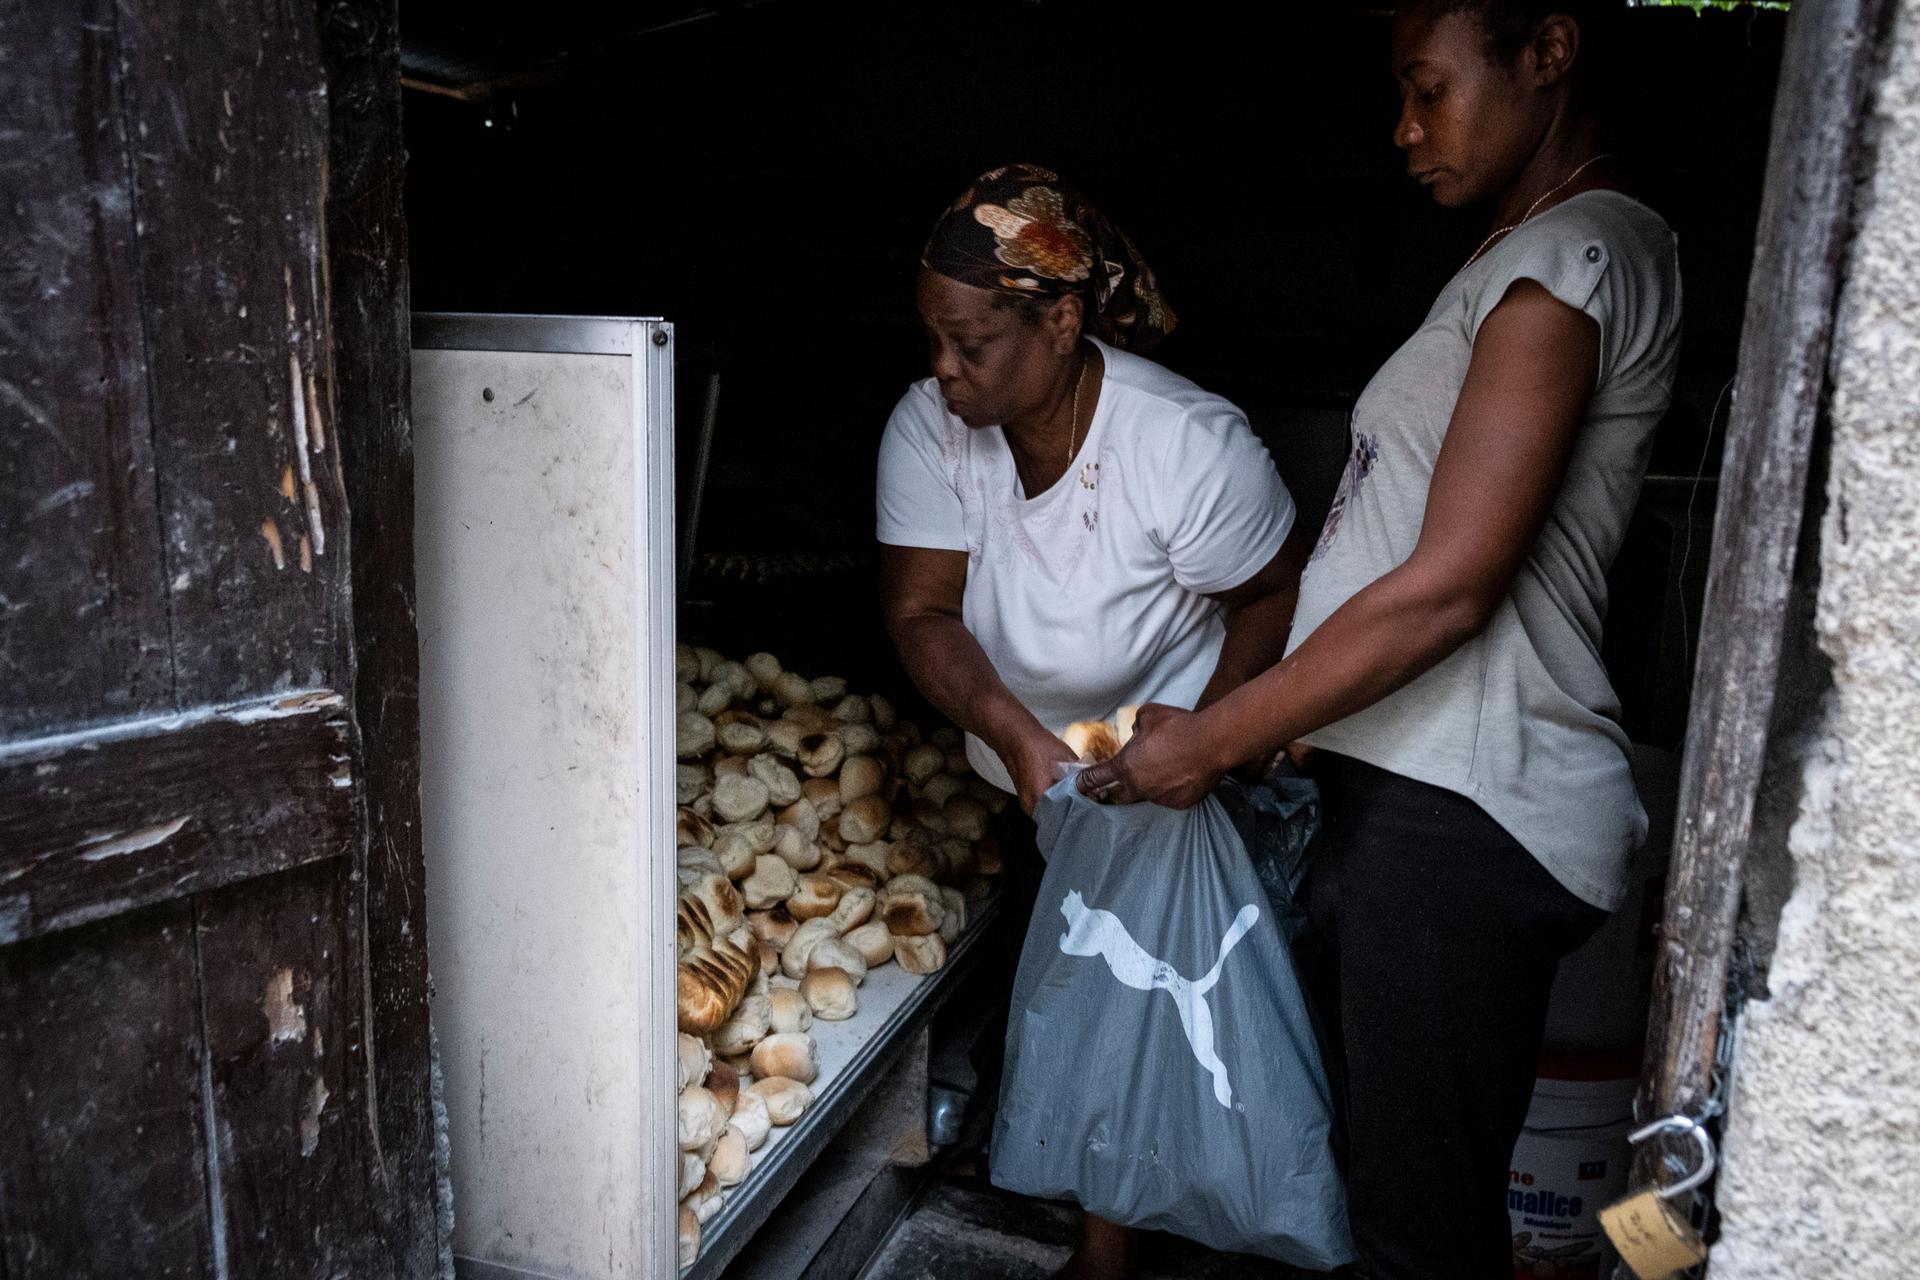 A woman is shown leaning over helping another woman load with biscuits into a plastic bag.